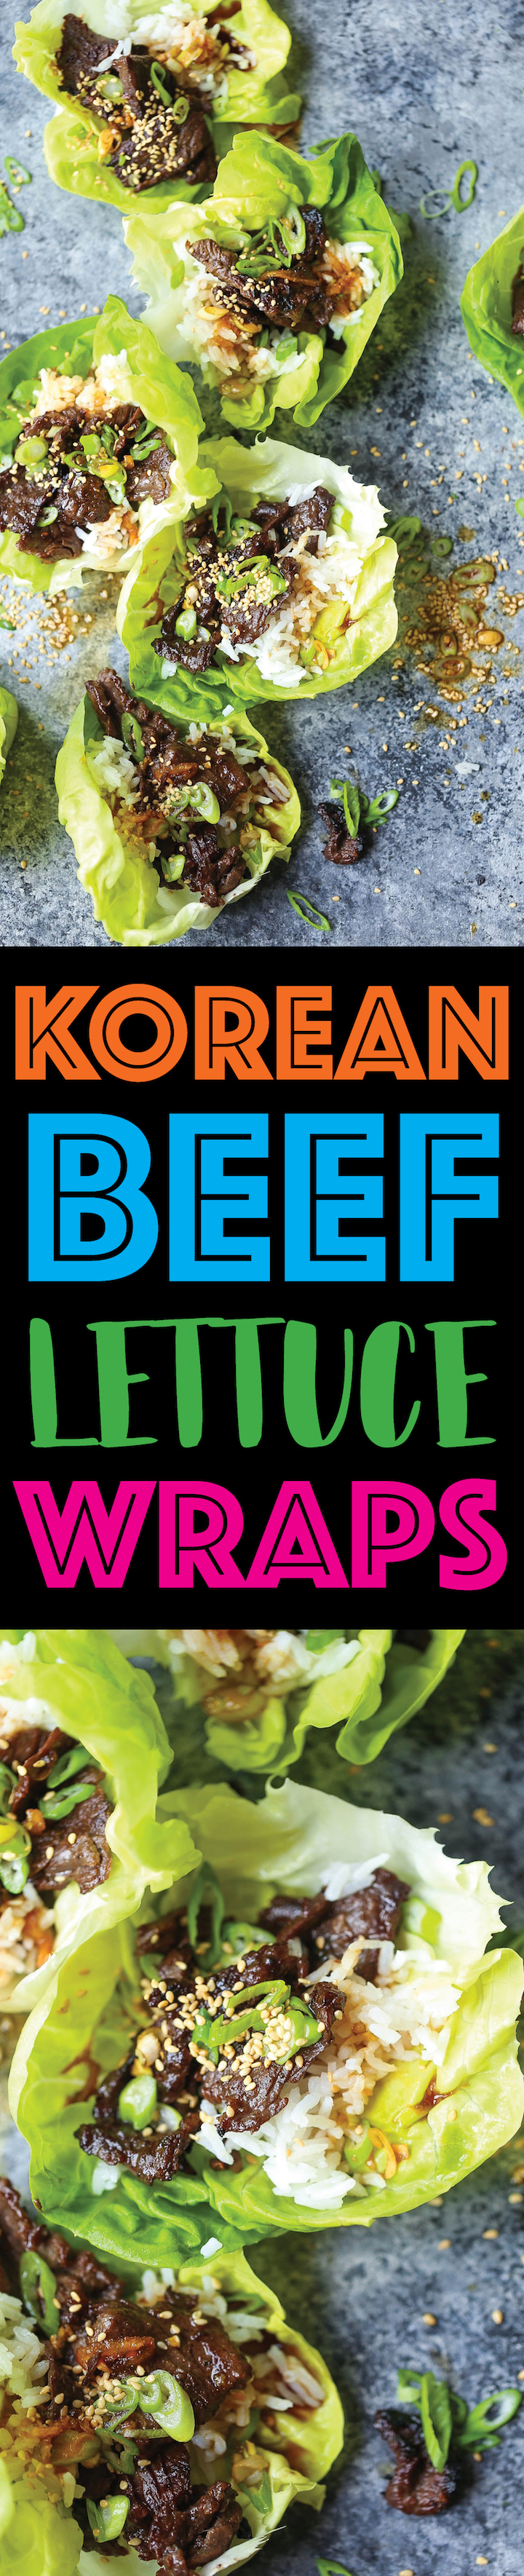 Korean Beef Lettuce Wraps - Everyone's favorite Korean BBQ made at home with these light/refreshing lettuce wraps! Can also be made/prepped ahead of time!